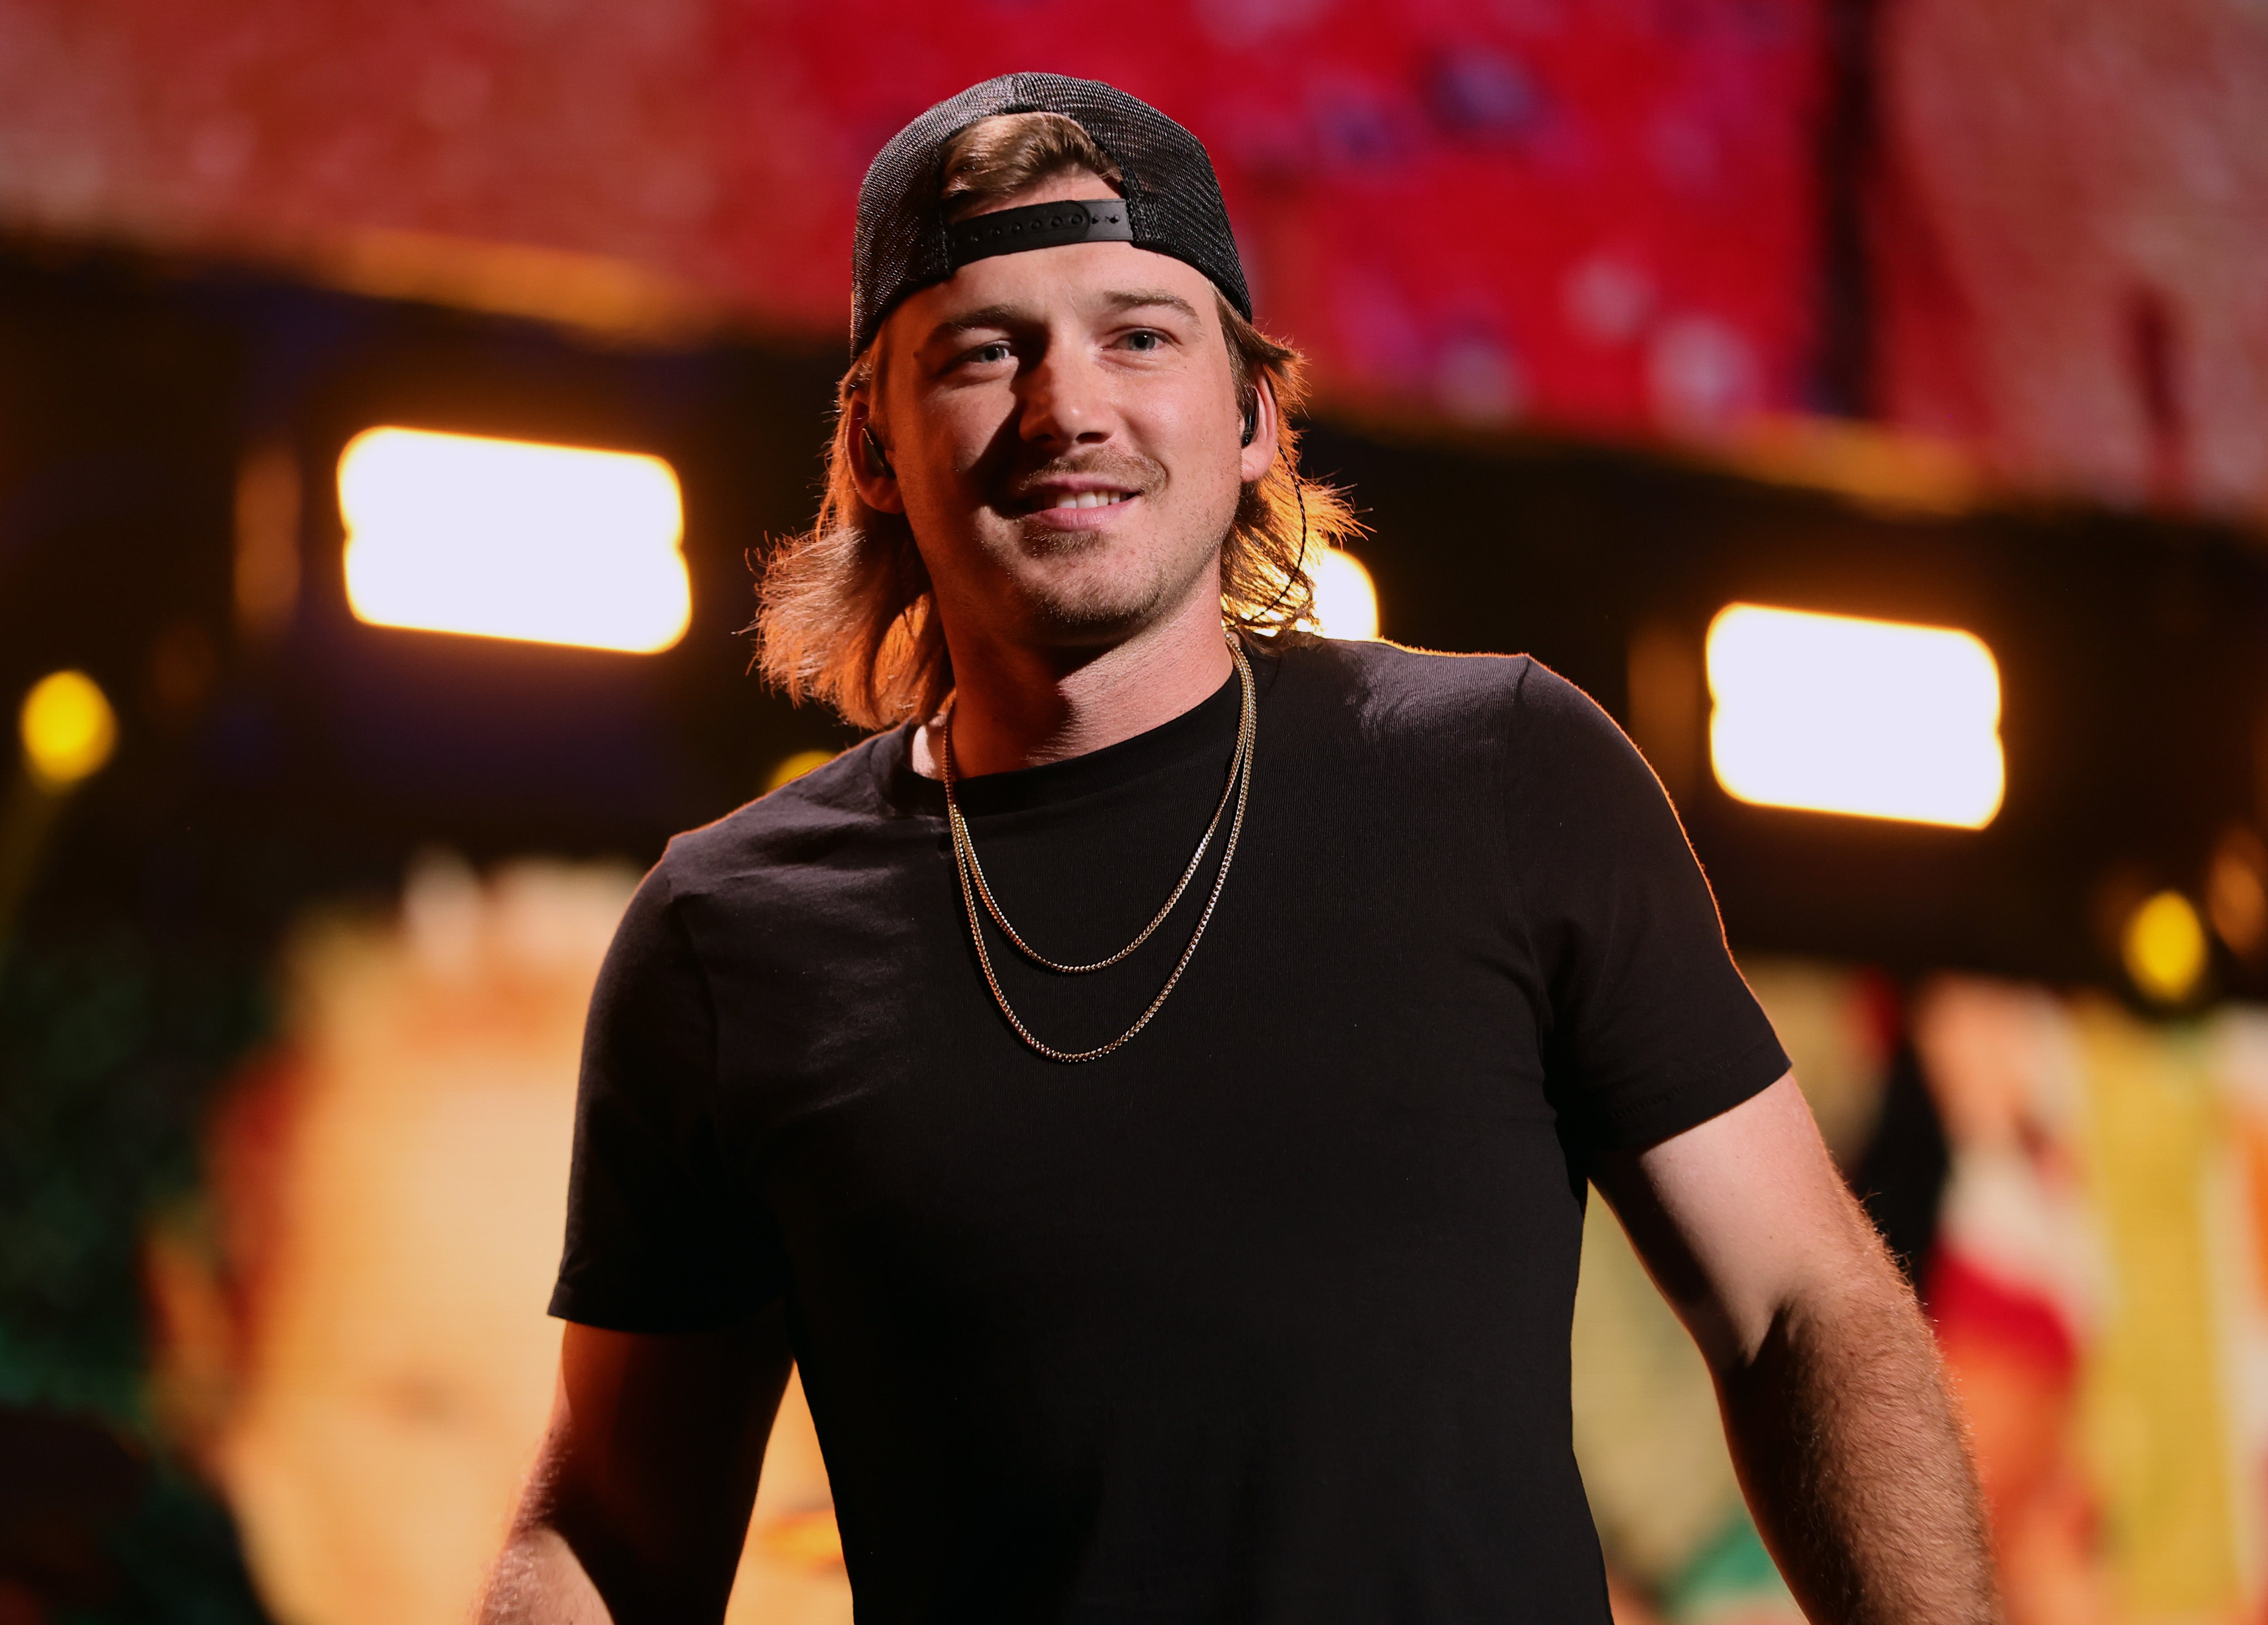 Morgan Wallen has apologised after an incident in Nashville